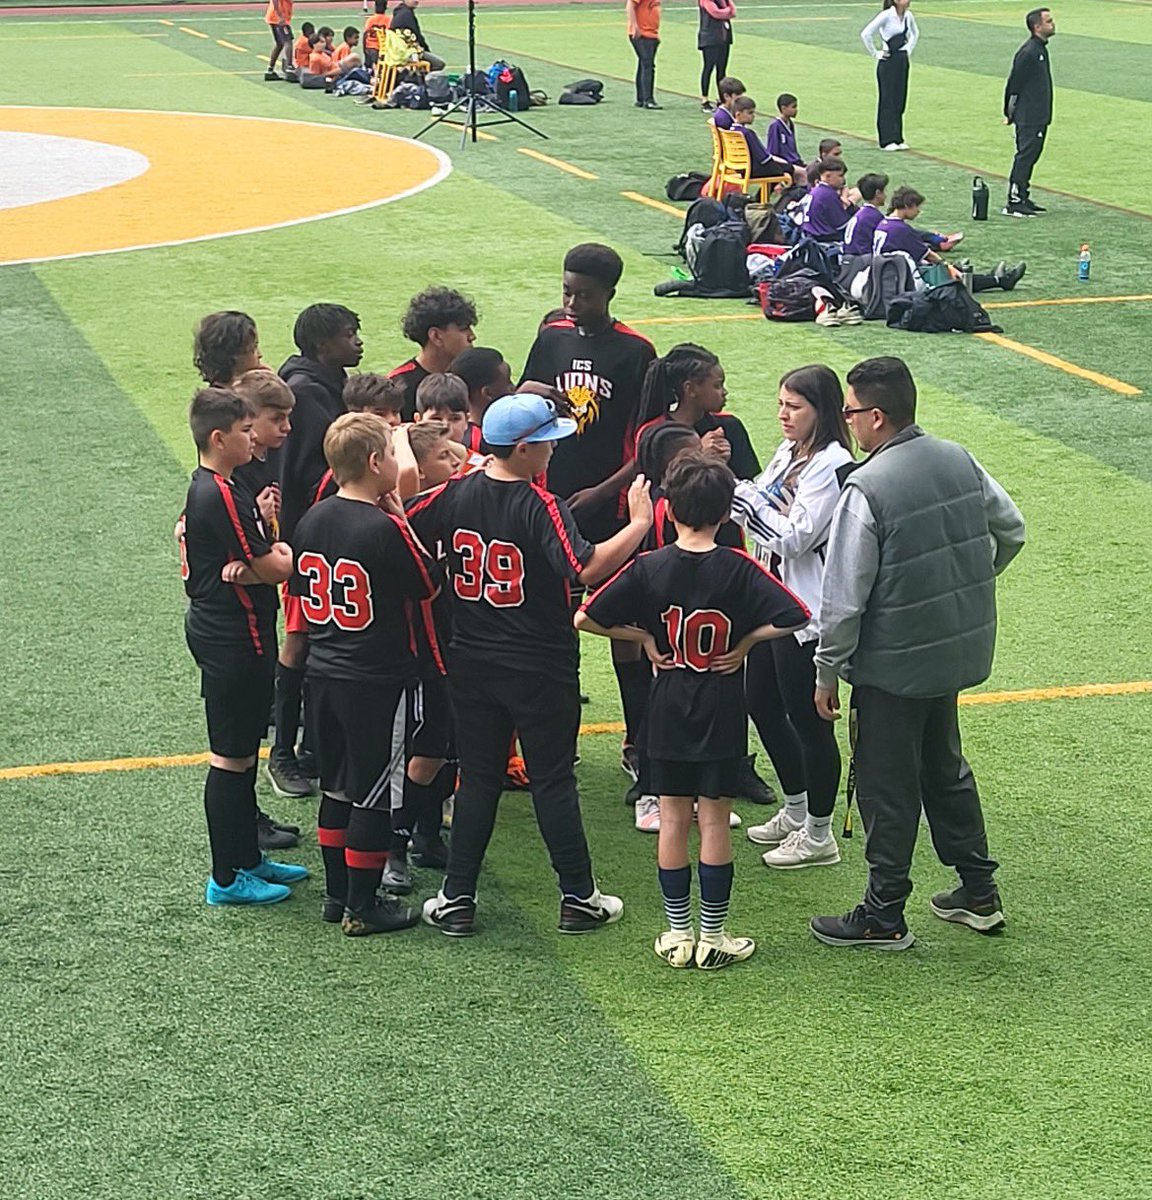 Congrats to our boys soccer team and coaches who participated in the De La Salle soccer tournament. Thank you to De La Salle College for the invitation to participate! @DLSOaklands @TCDSB @BarbaraCapano